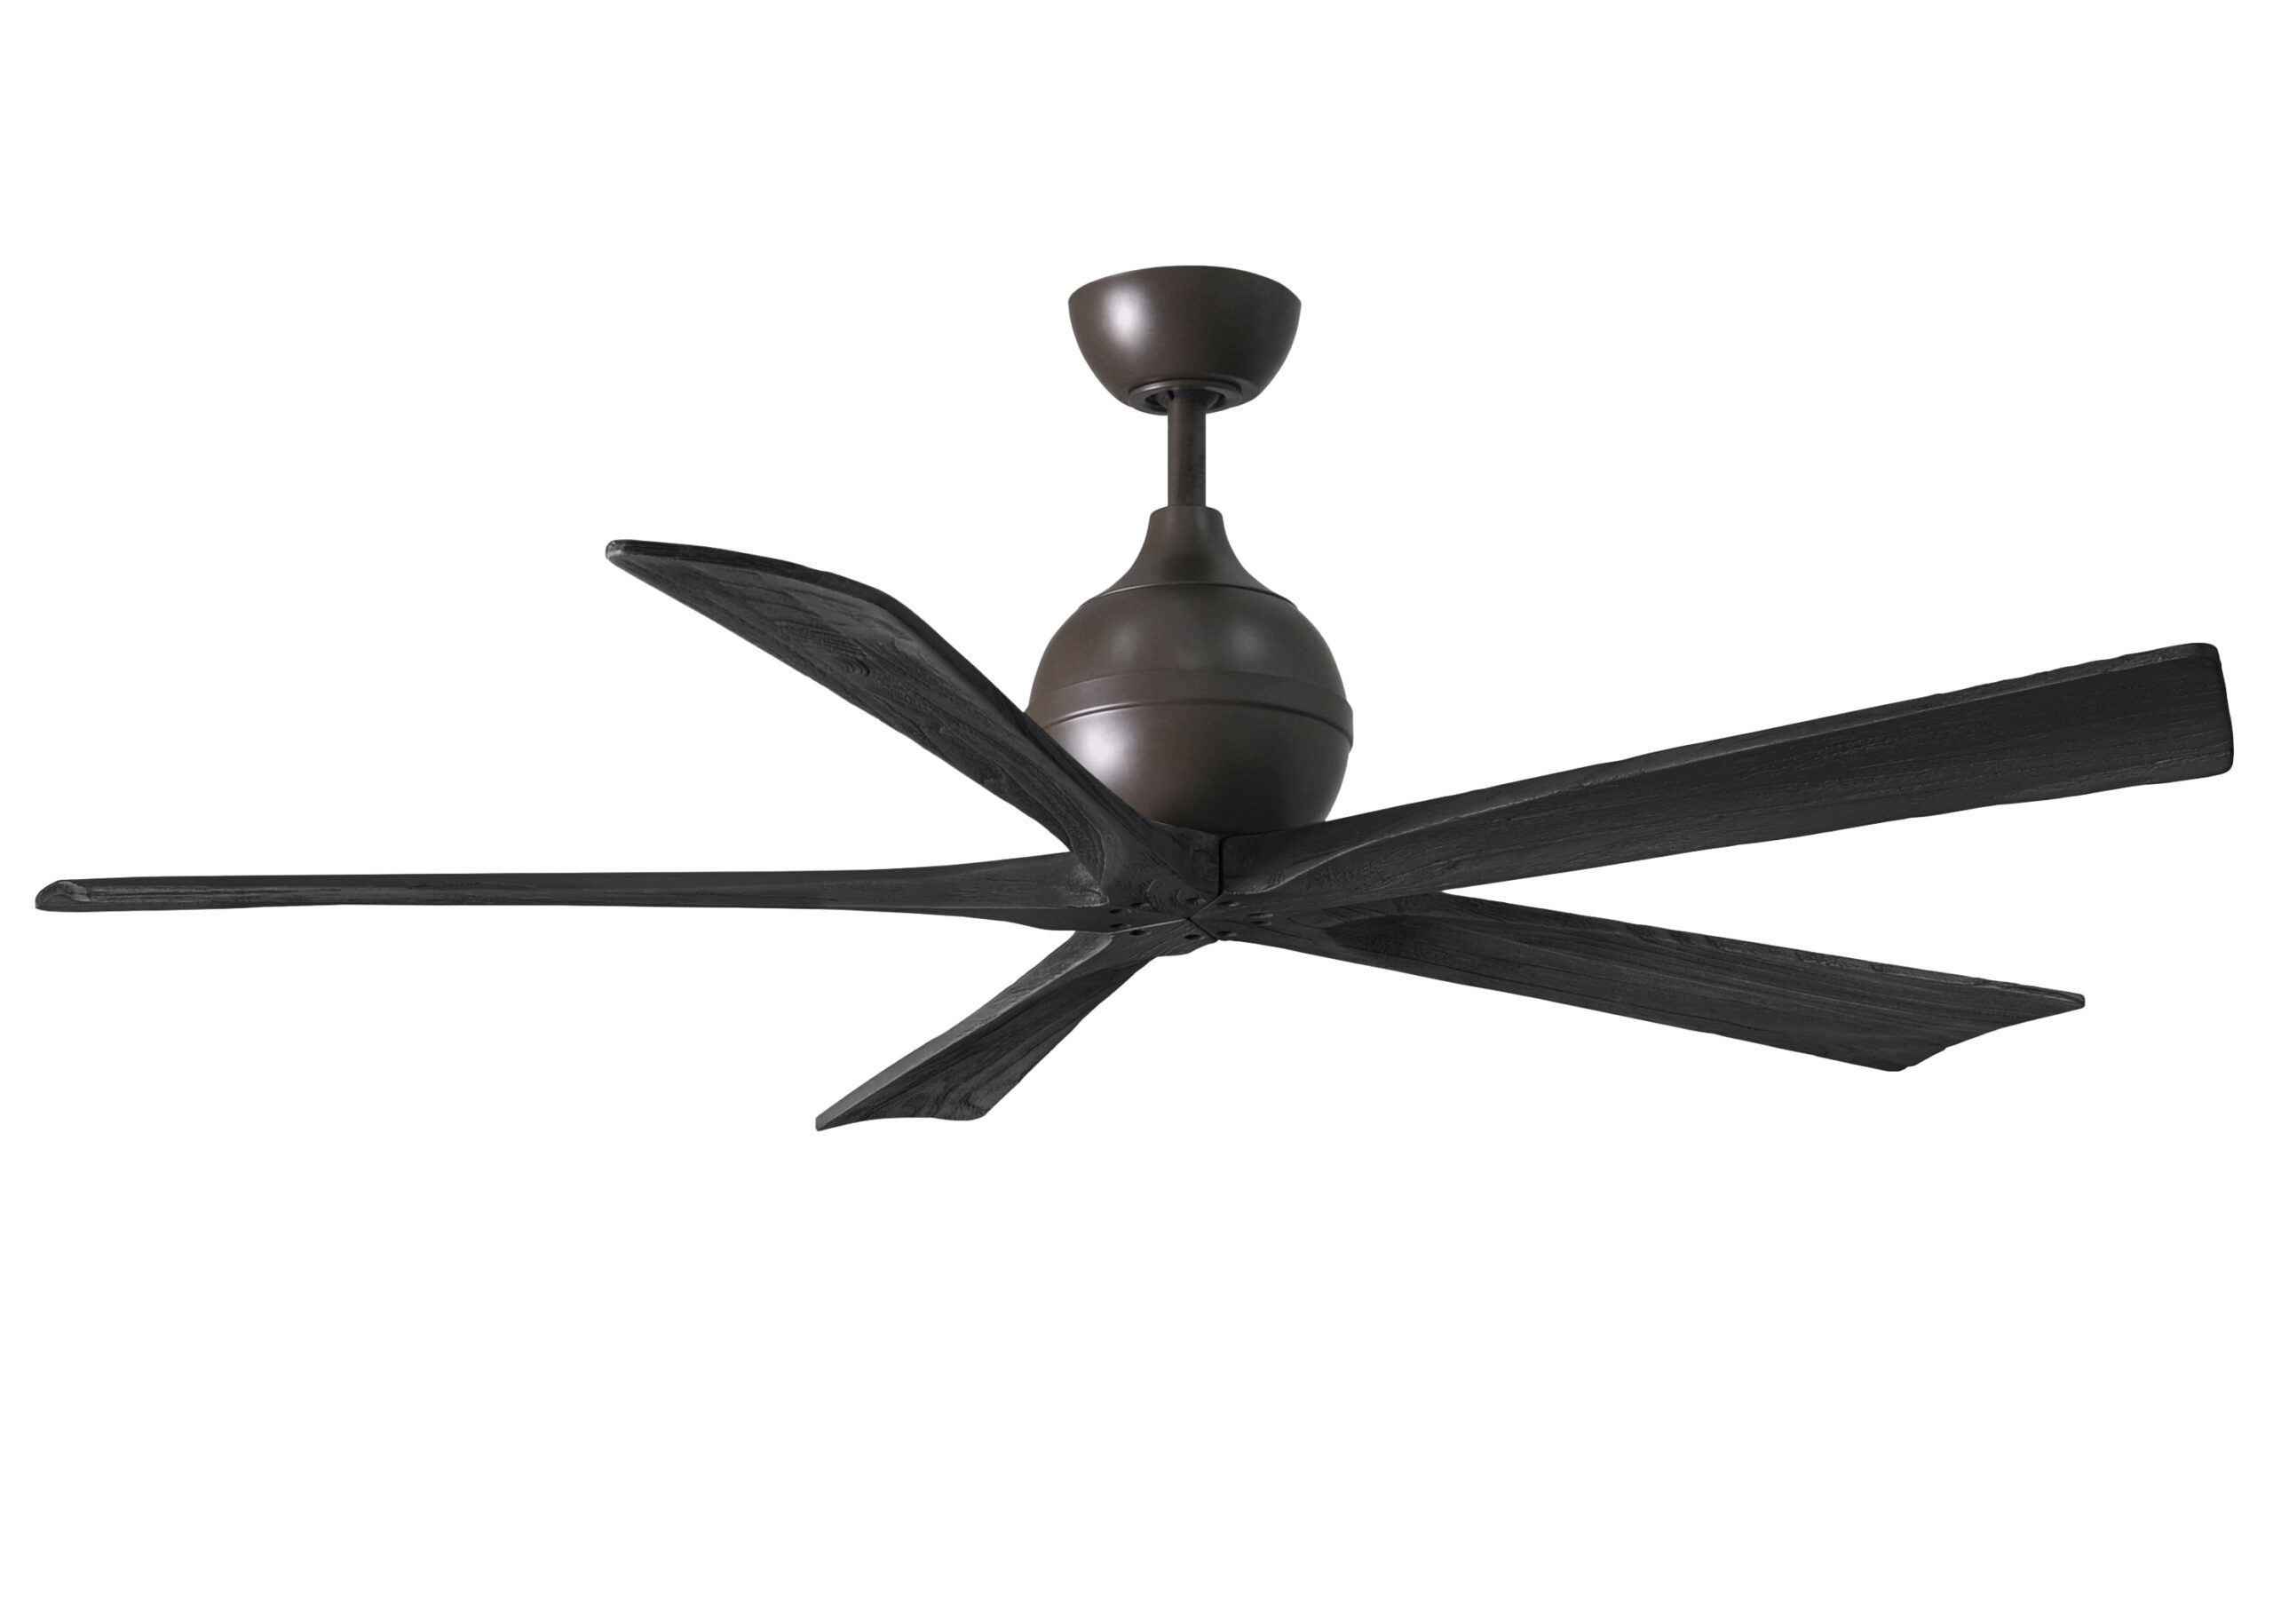 Irene-5 Ceiling Fan in Textured Bronze Finish with 60